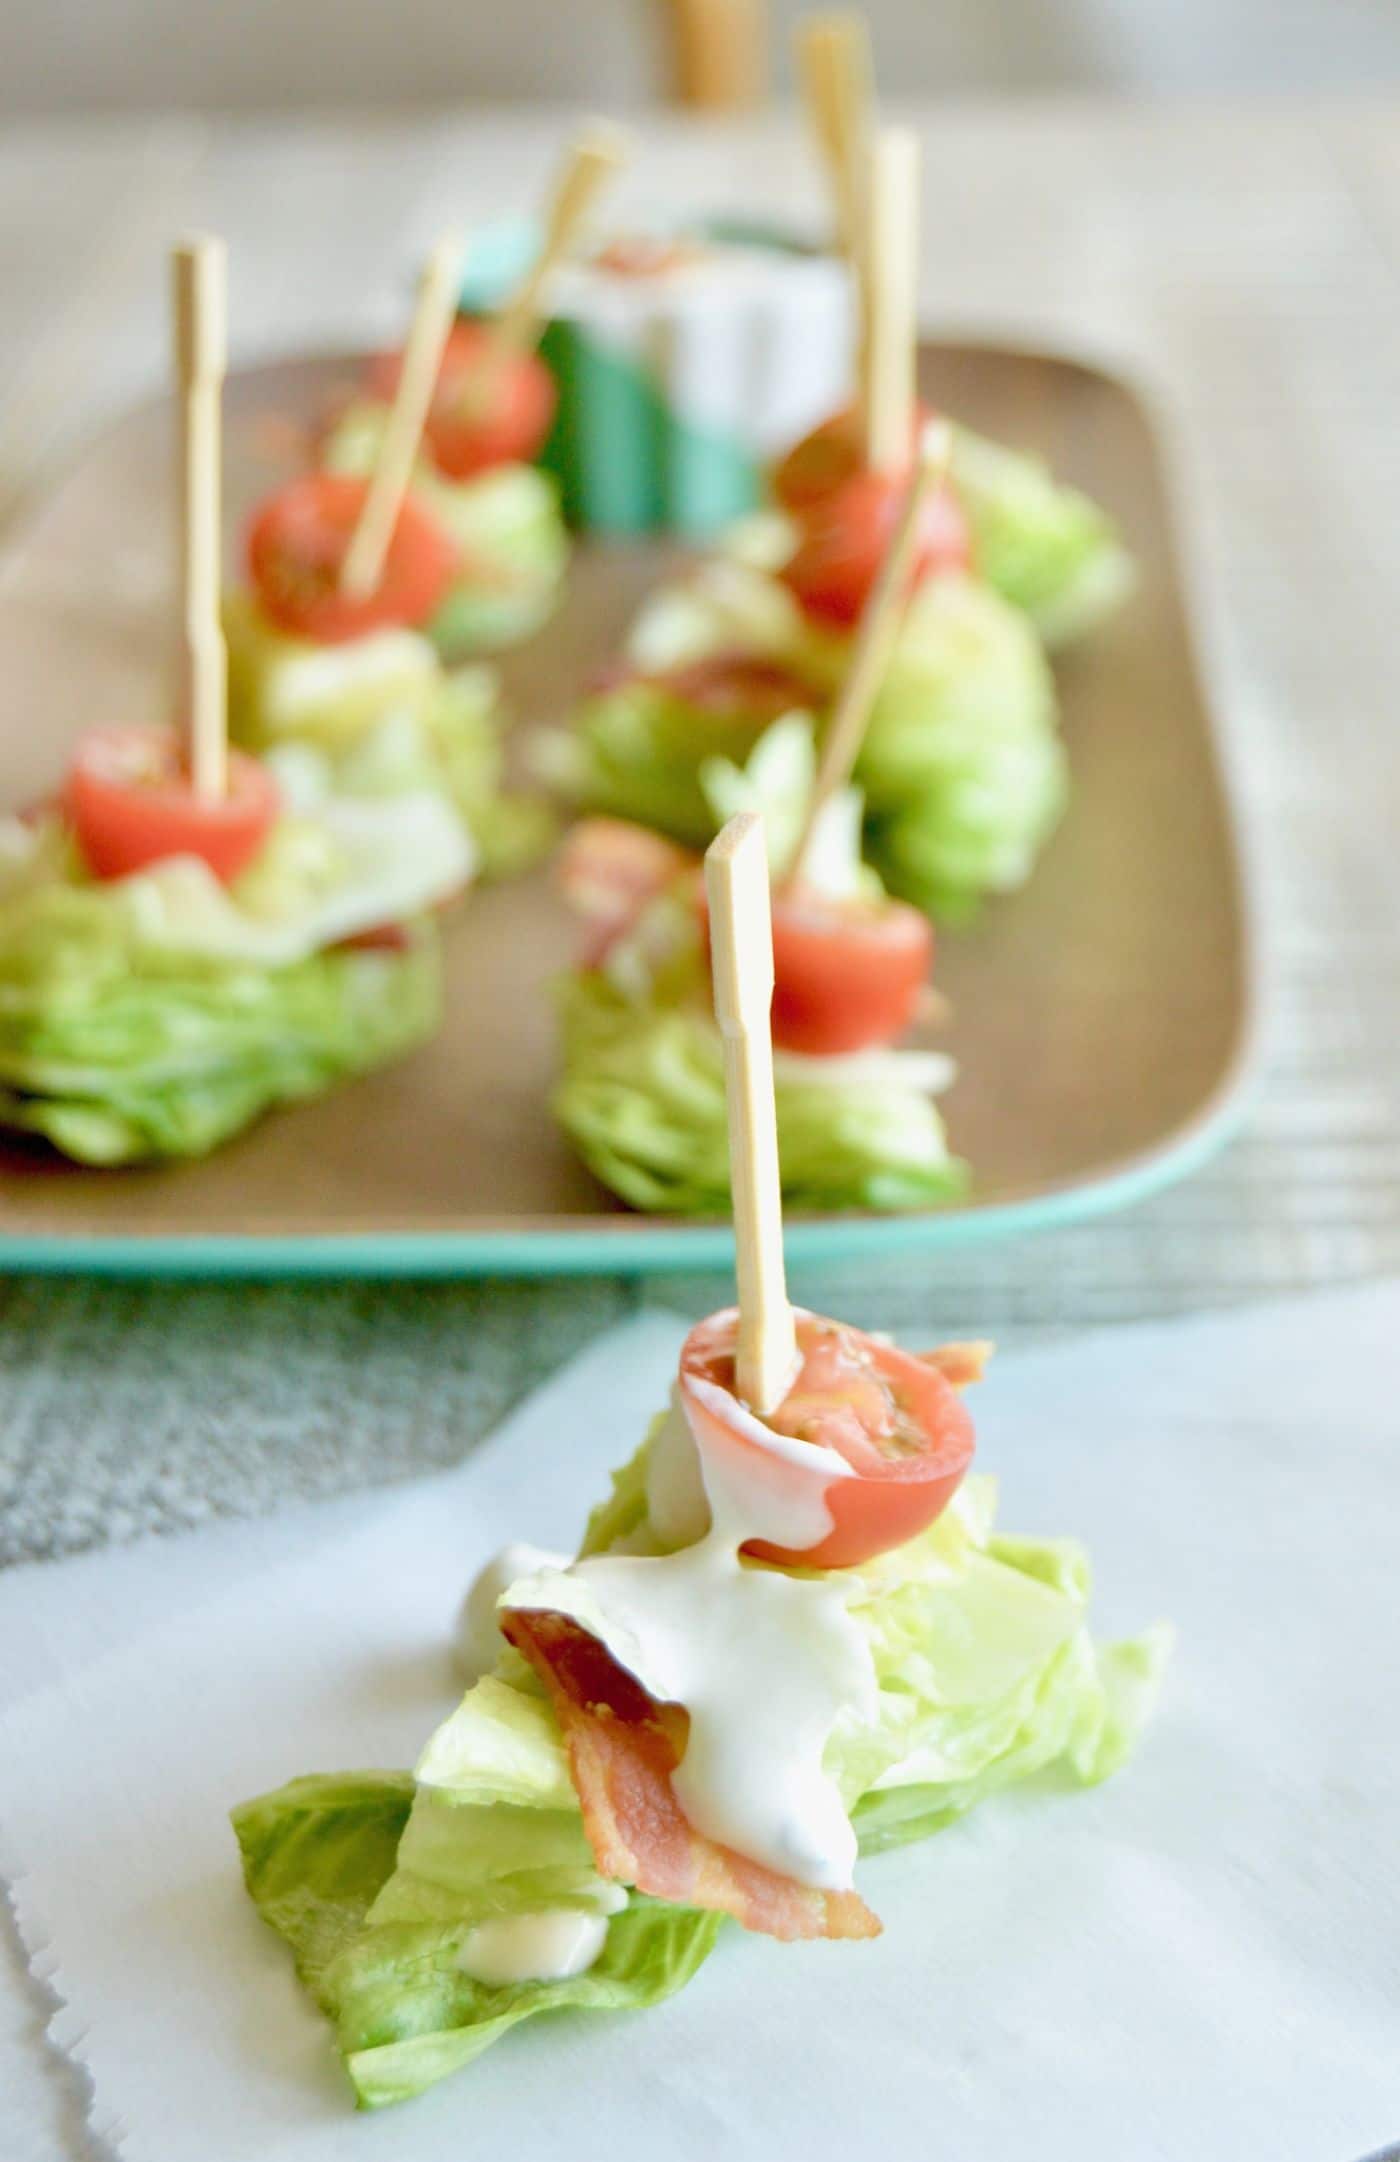 BLT Salad Bites are a simple starter for any party.  They can be made ahead and just drizzled with homemade Blue Cheese Dressing at the last minute!